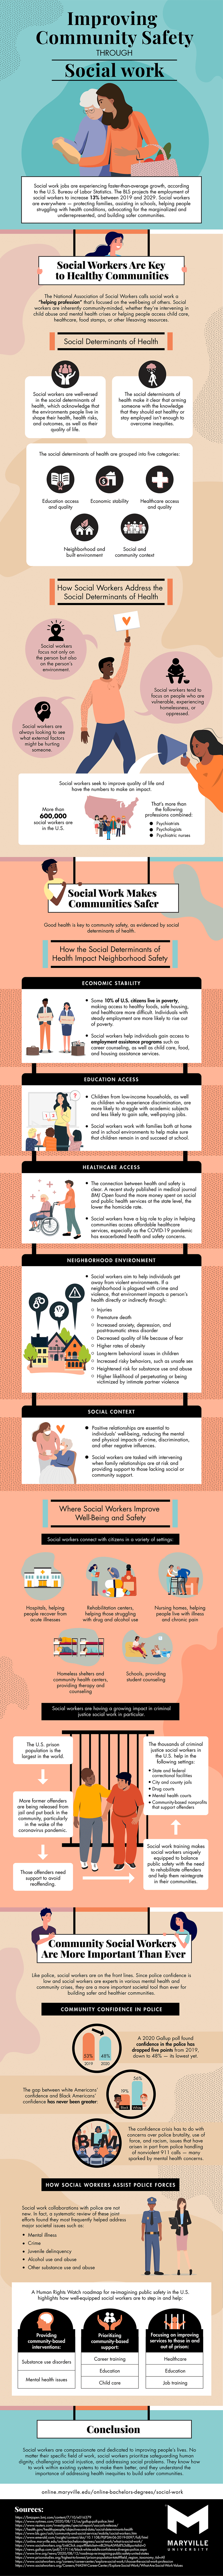 Improving community safety through social work graphic.